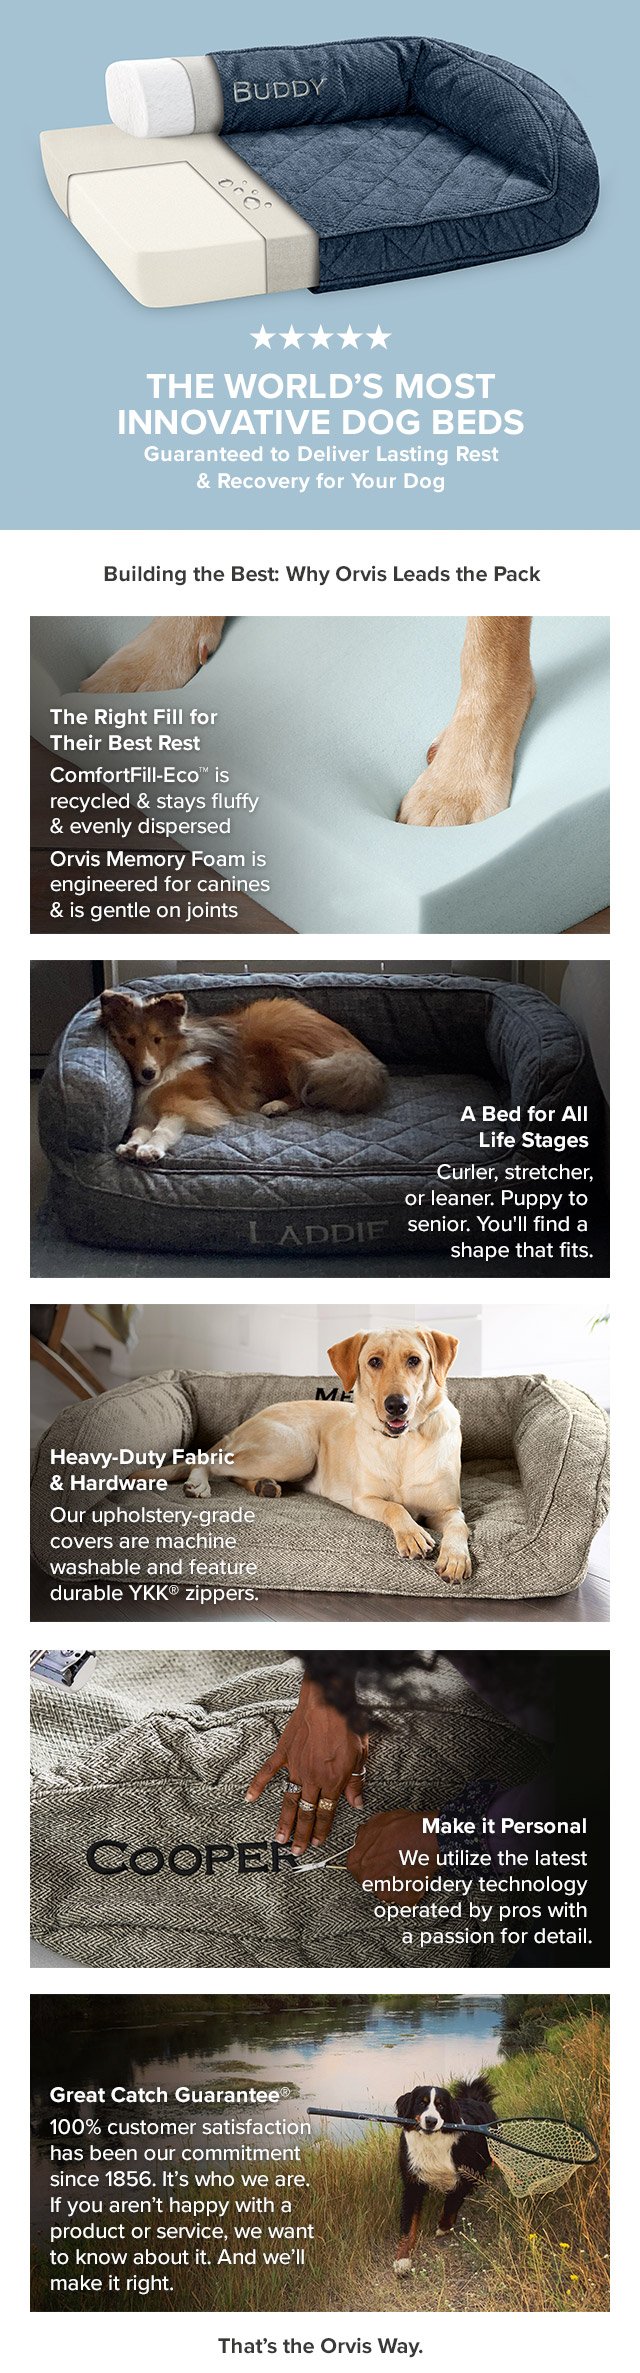 ☆☆☆☆☆ The World's Most Innovative Dog Beds Guaranteed to Deliver Lasting Rest & Recovery for Your Dog Building the Best: Why Orvis Leads the Pack The RIght Fill for Their Best Rest ComfortFill-Eco™ is recycled & stays fluffy & evenly dispersed Orvis Memory Foam is engineered for canines & is gentle on joints How Does Your Dog Sleep? Curler, stretcher, or leaner. Puppy to senior. You'll find a shape that fits. Heavy-Duty Fabric & Hardware Our upholstery-grade covers are machine washable and feature durable YKK® zippers. Make it Personal We utilize the latest embroidery technology operated by pros with a passion for detail. Great Catch Guarantee® 100% customer satisfaction has been our commitment since 1856. It’s who we are. If you aren’t happy with a product or service, we want to know about it. And we’ll make it right. That’s the Orvis Way.